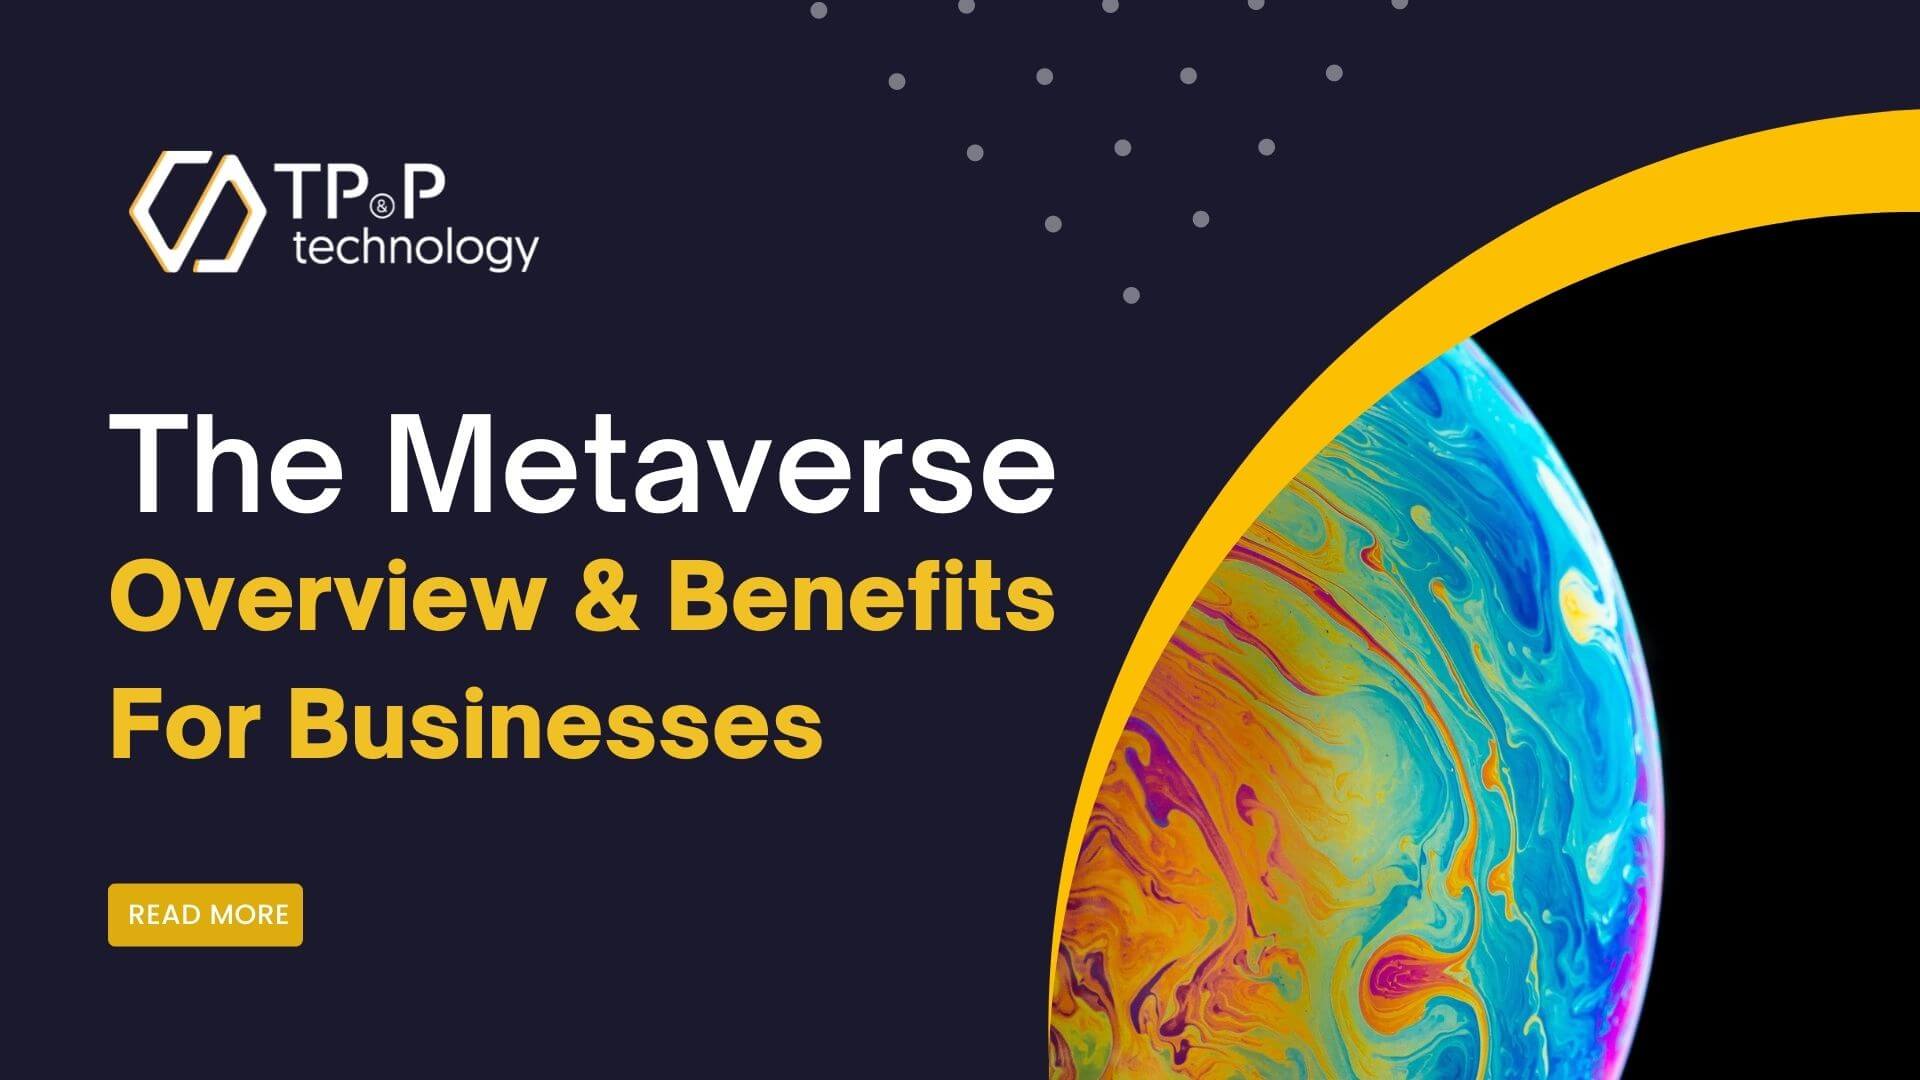 The Metaverse and Its Benefits for Business